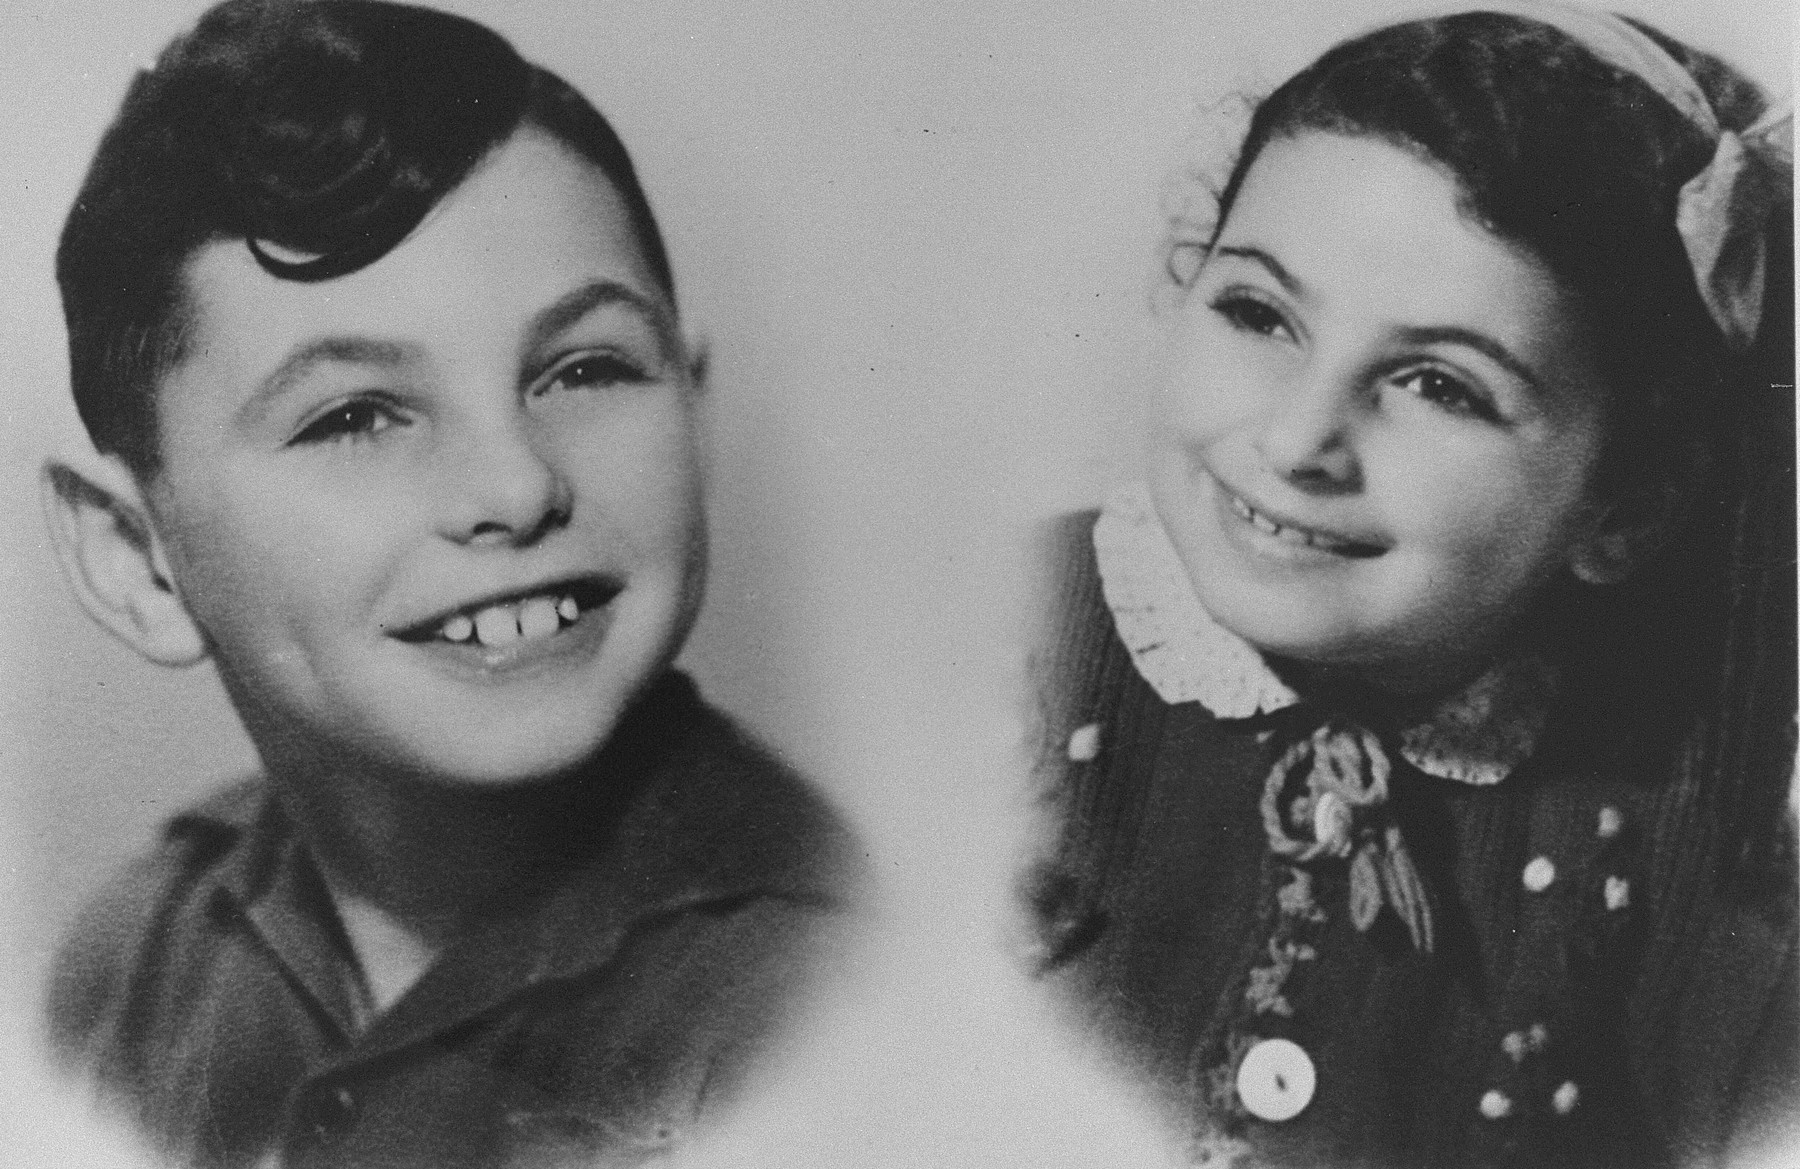 Portrait of two Jewish children, Shlomo and Eva Haringman, while living in hiding with the DeVries family.